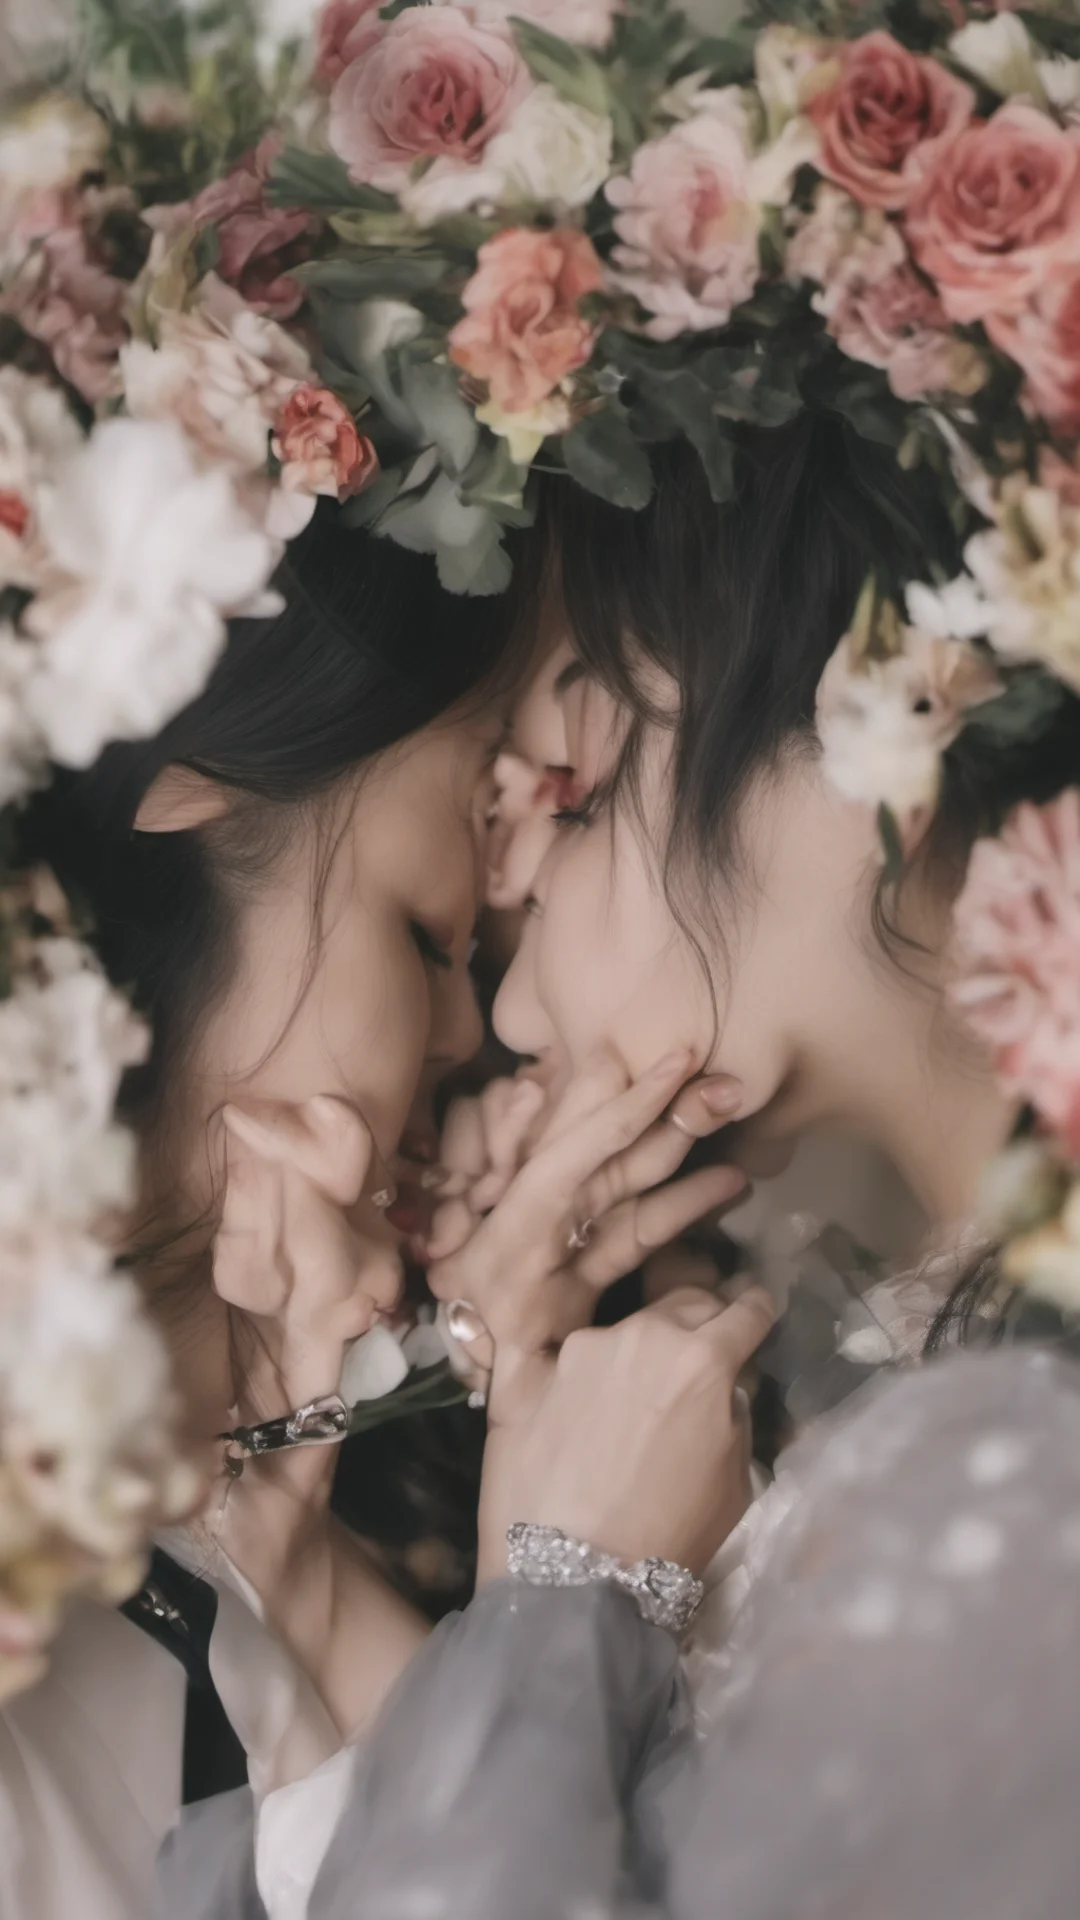 aiasian female lesbian kissing with her girlfriend wearing formal suit  amazing awesome portrait 2 tall